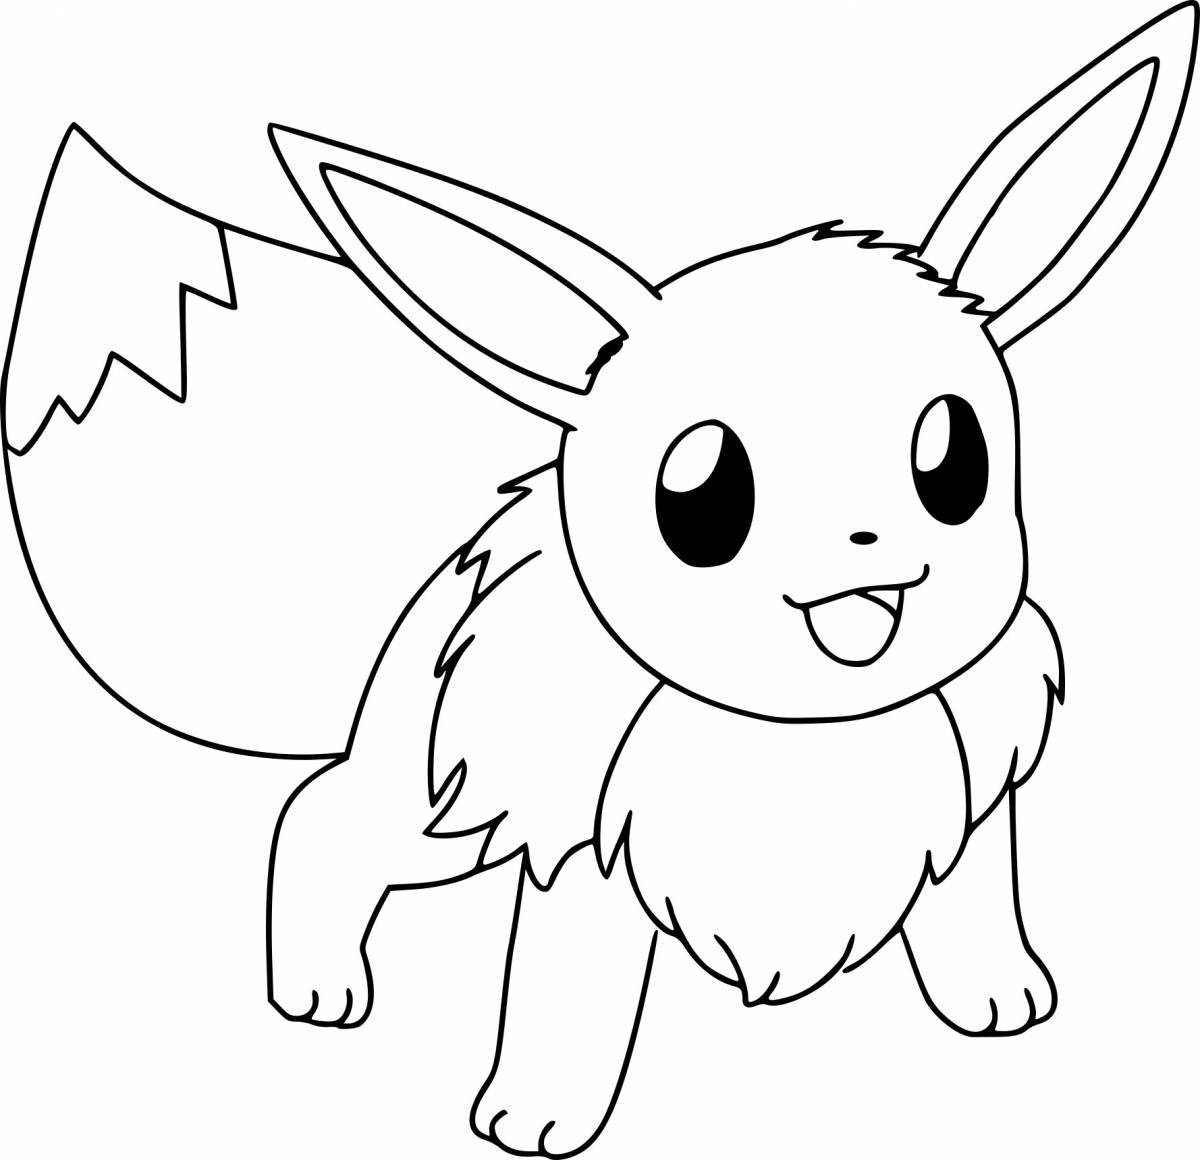 Coloring page dazzling pikachu